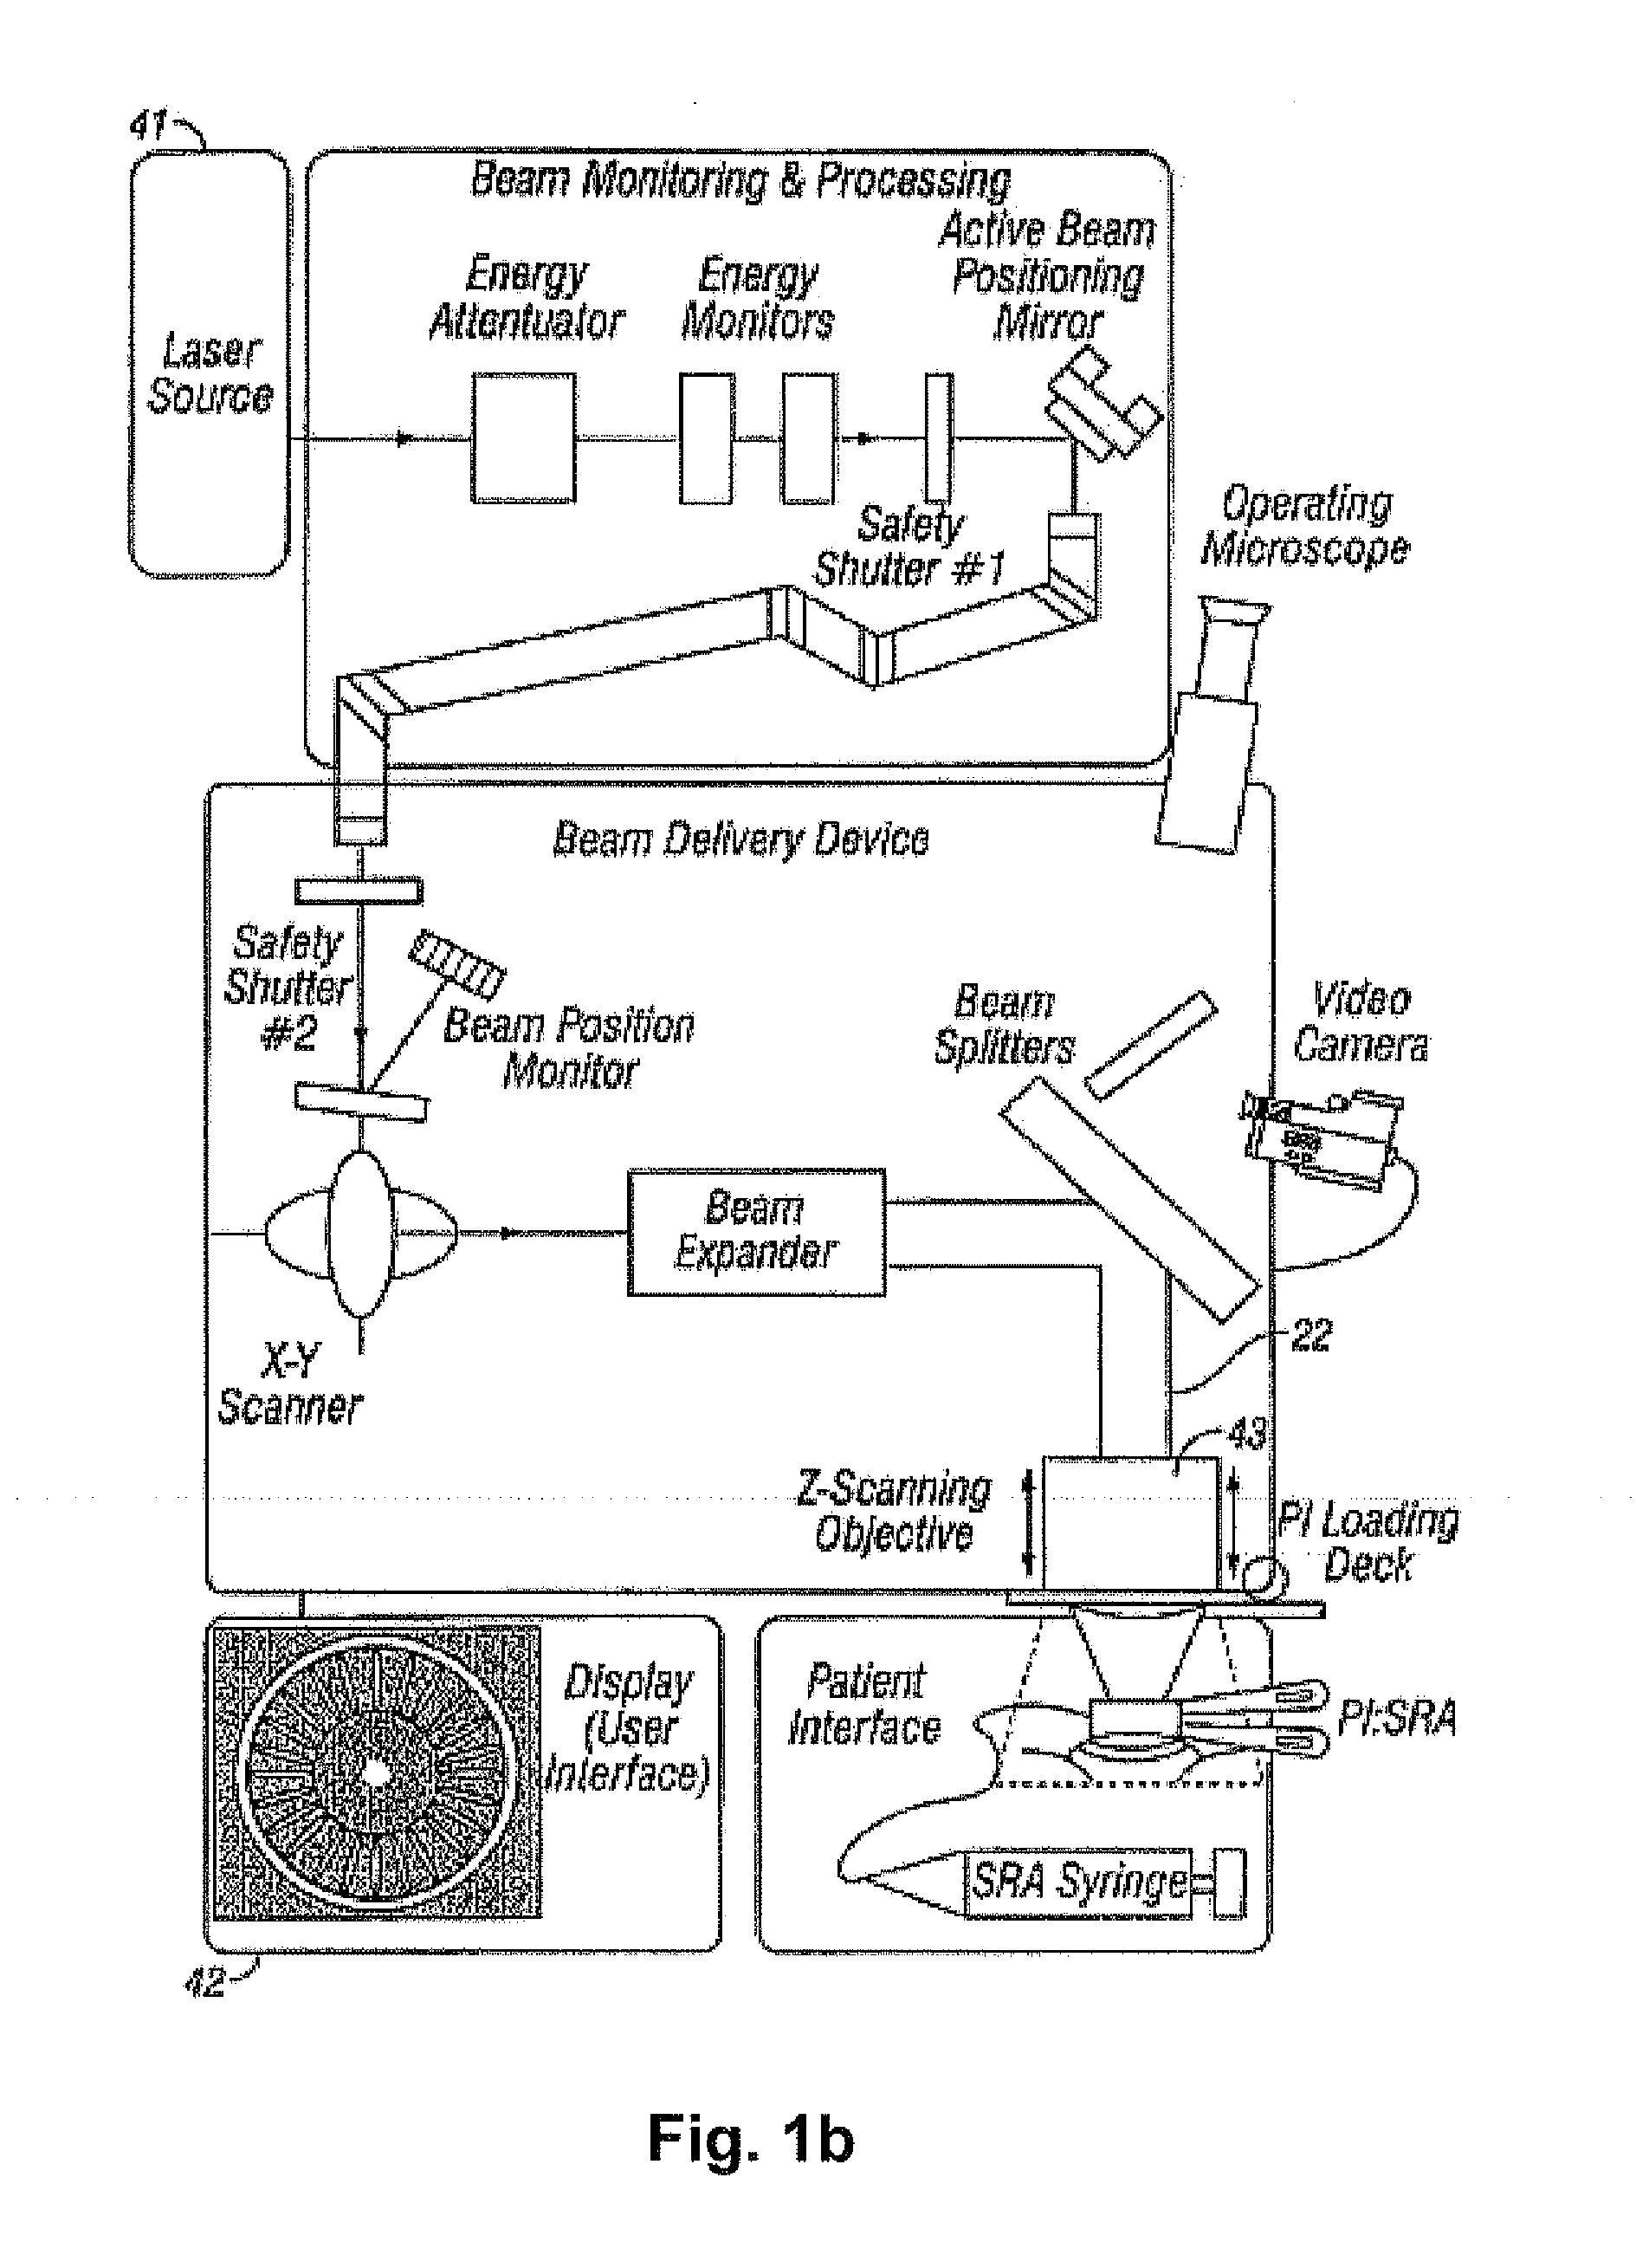 Systems and methods for providing remote diagnostics and support for surgical systems